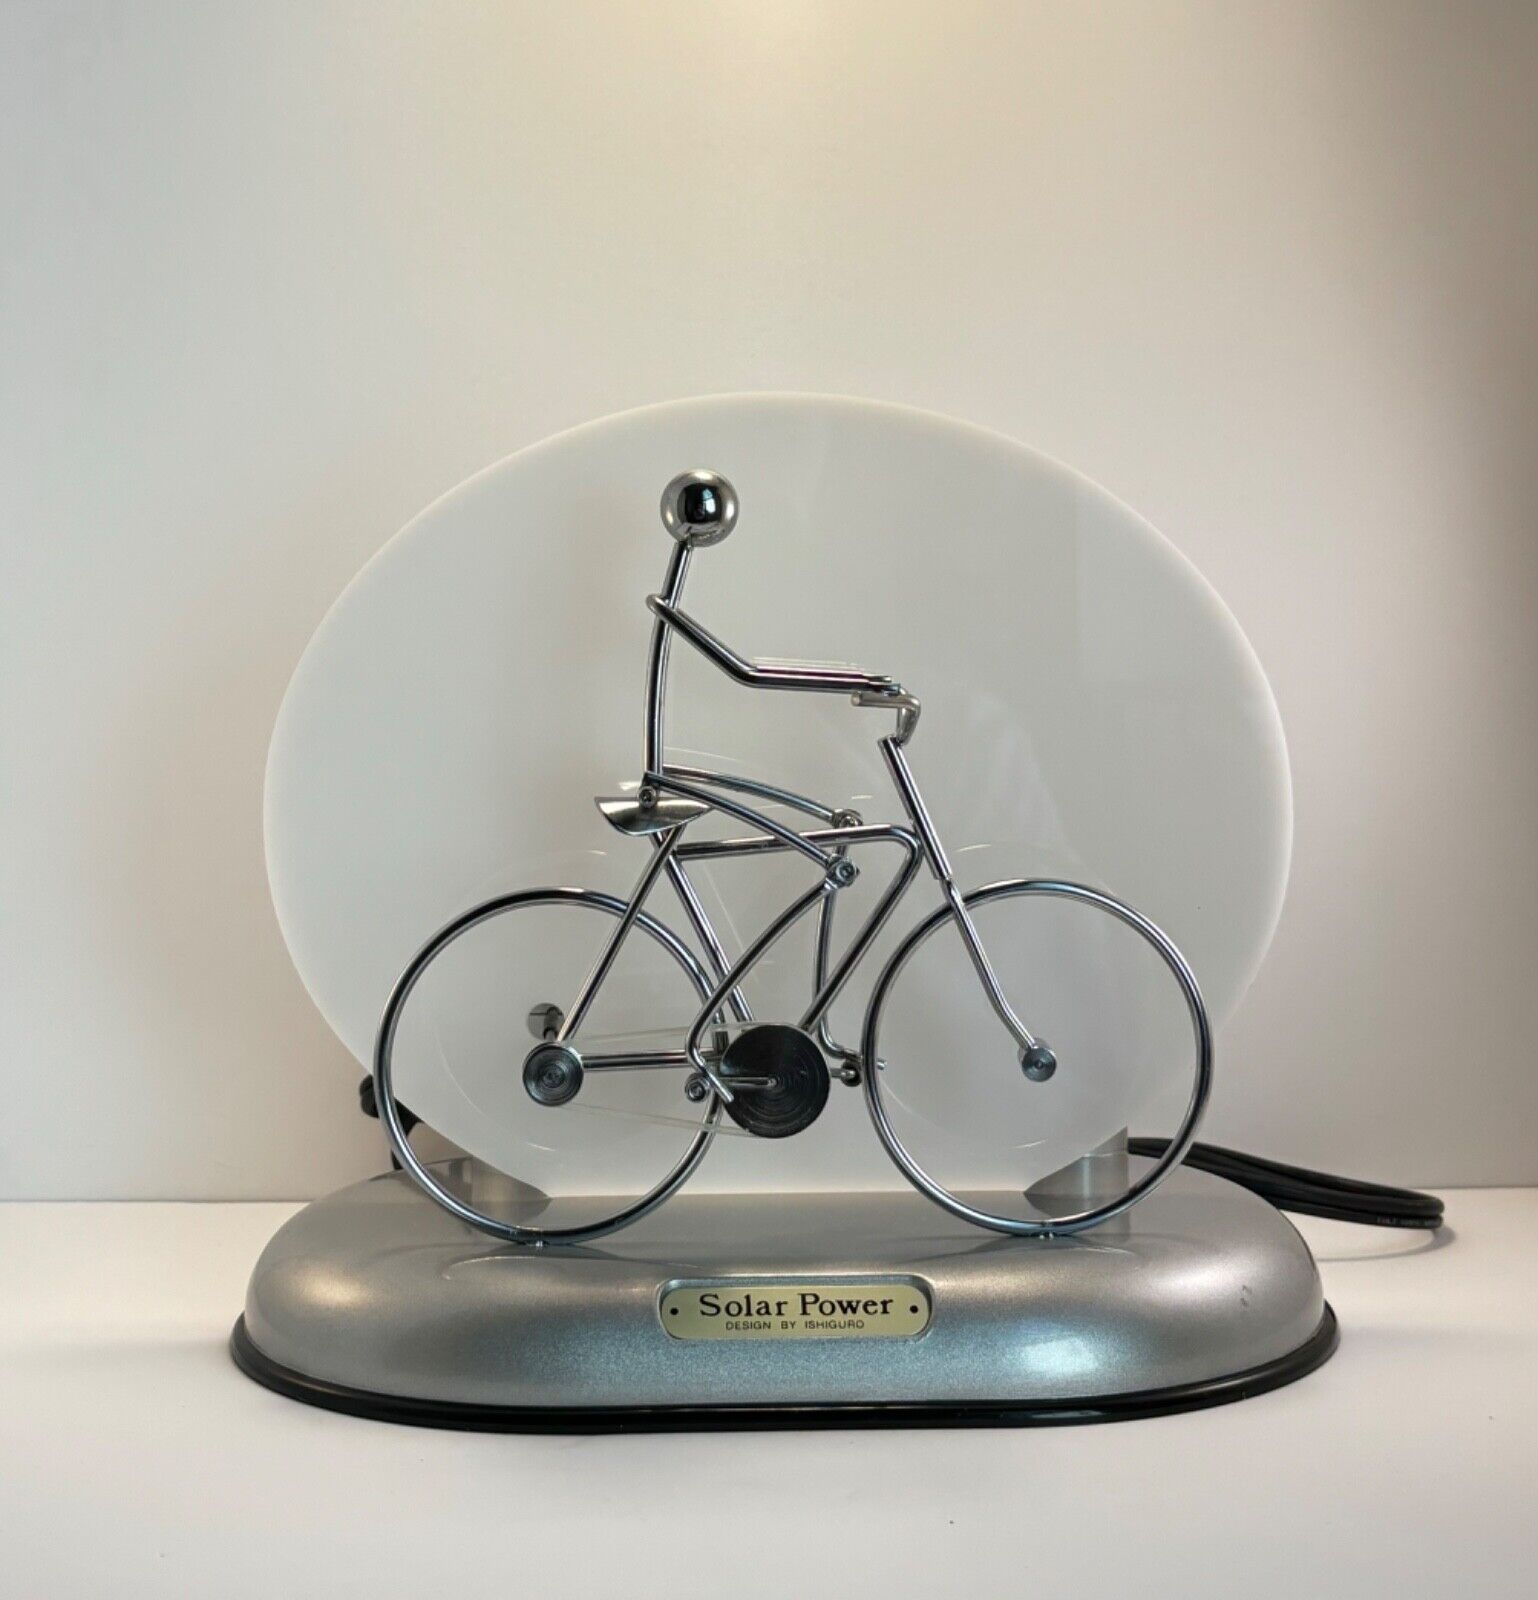 Ishiguro Solar Power Table Lamp- Motion Man Pedaling Bicycle | Working Condition